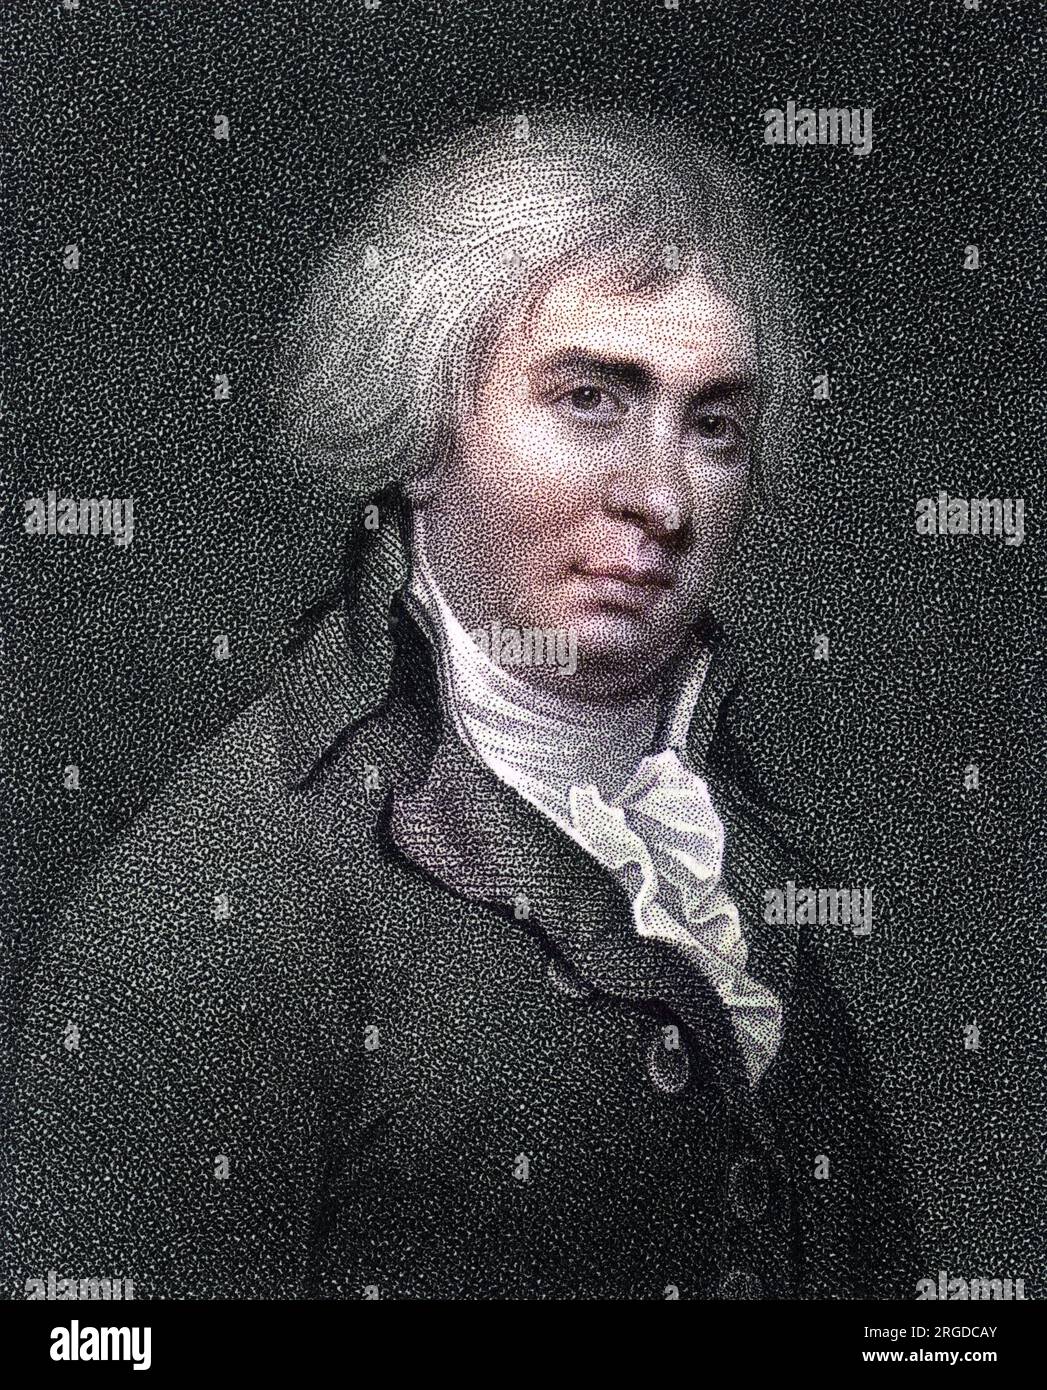 RICHARD BRINSLEY SHERIDAN Playwright, whose 'The rivals' and 'The school for scandal' have proved enduring classics. Stock Photo